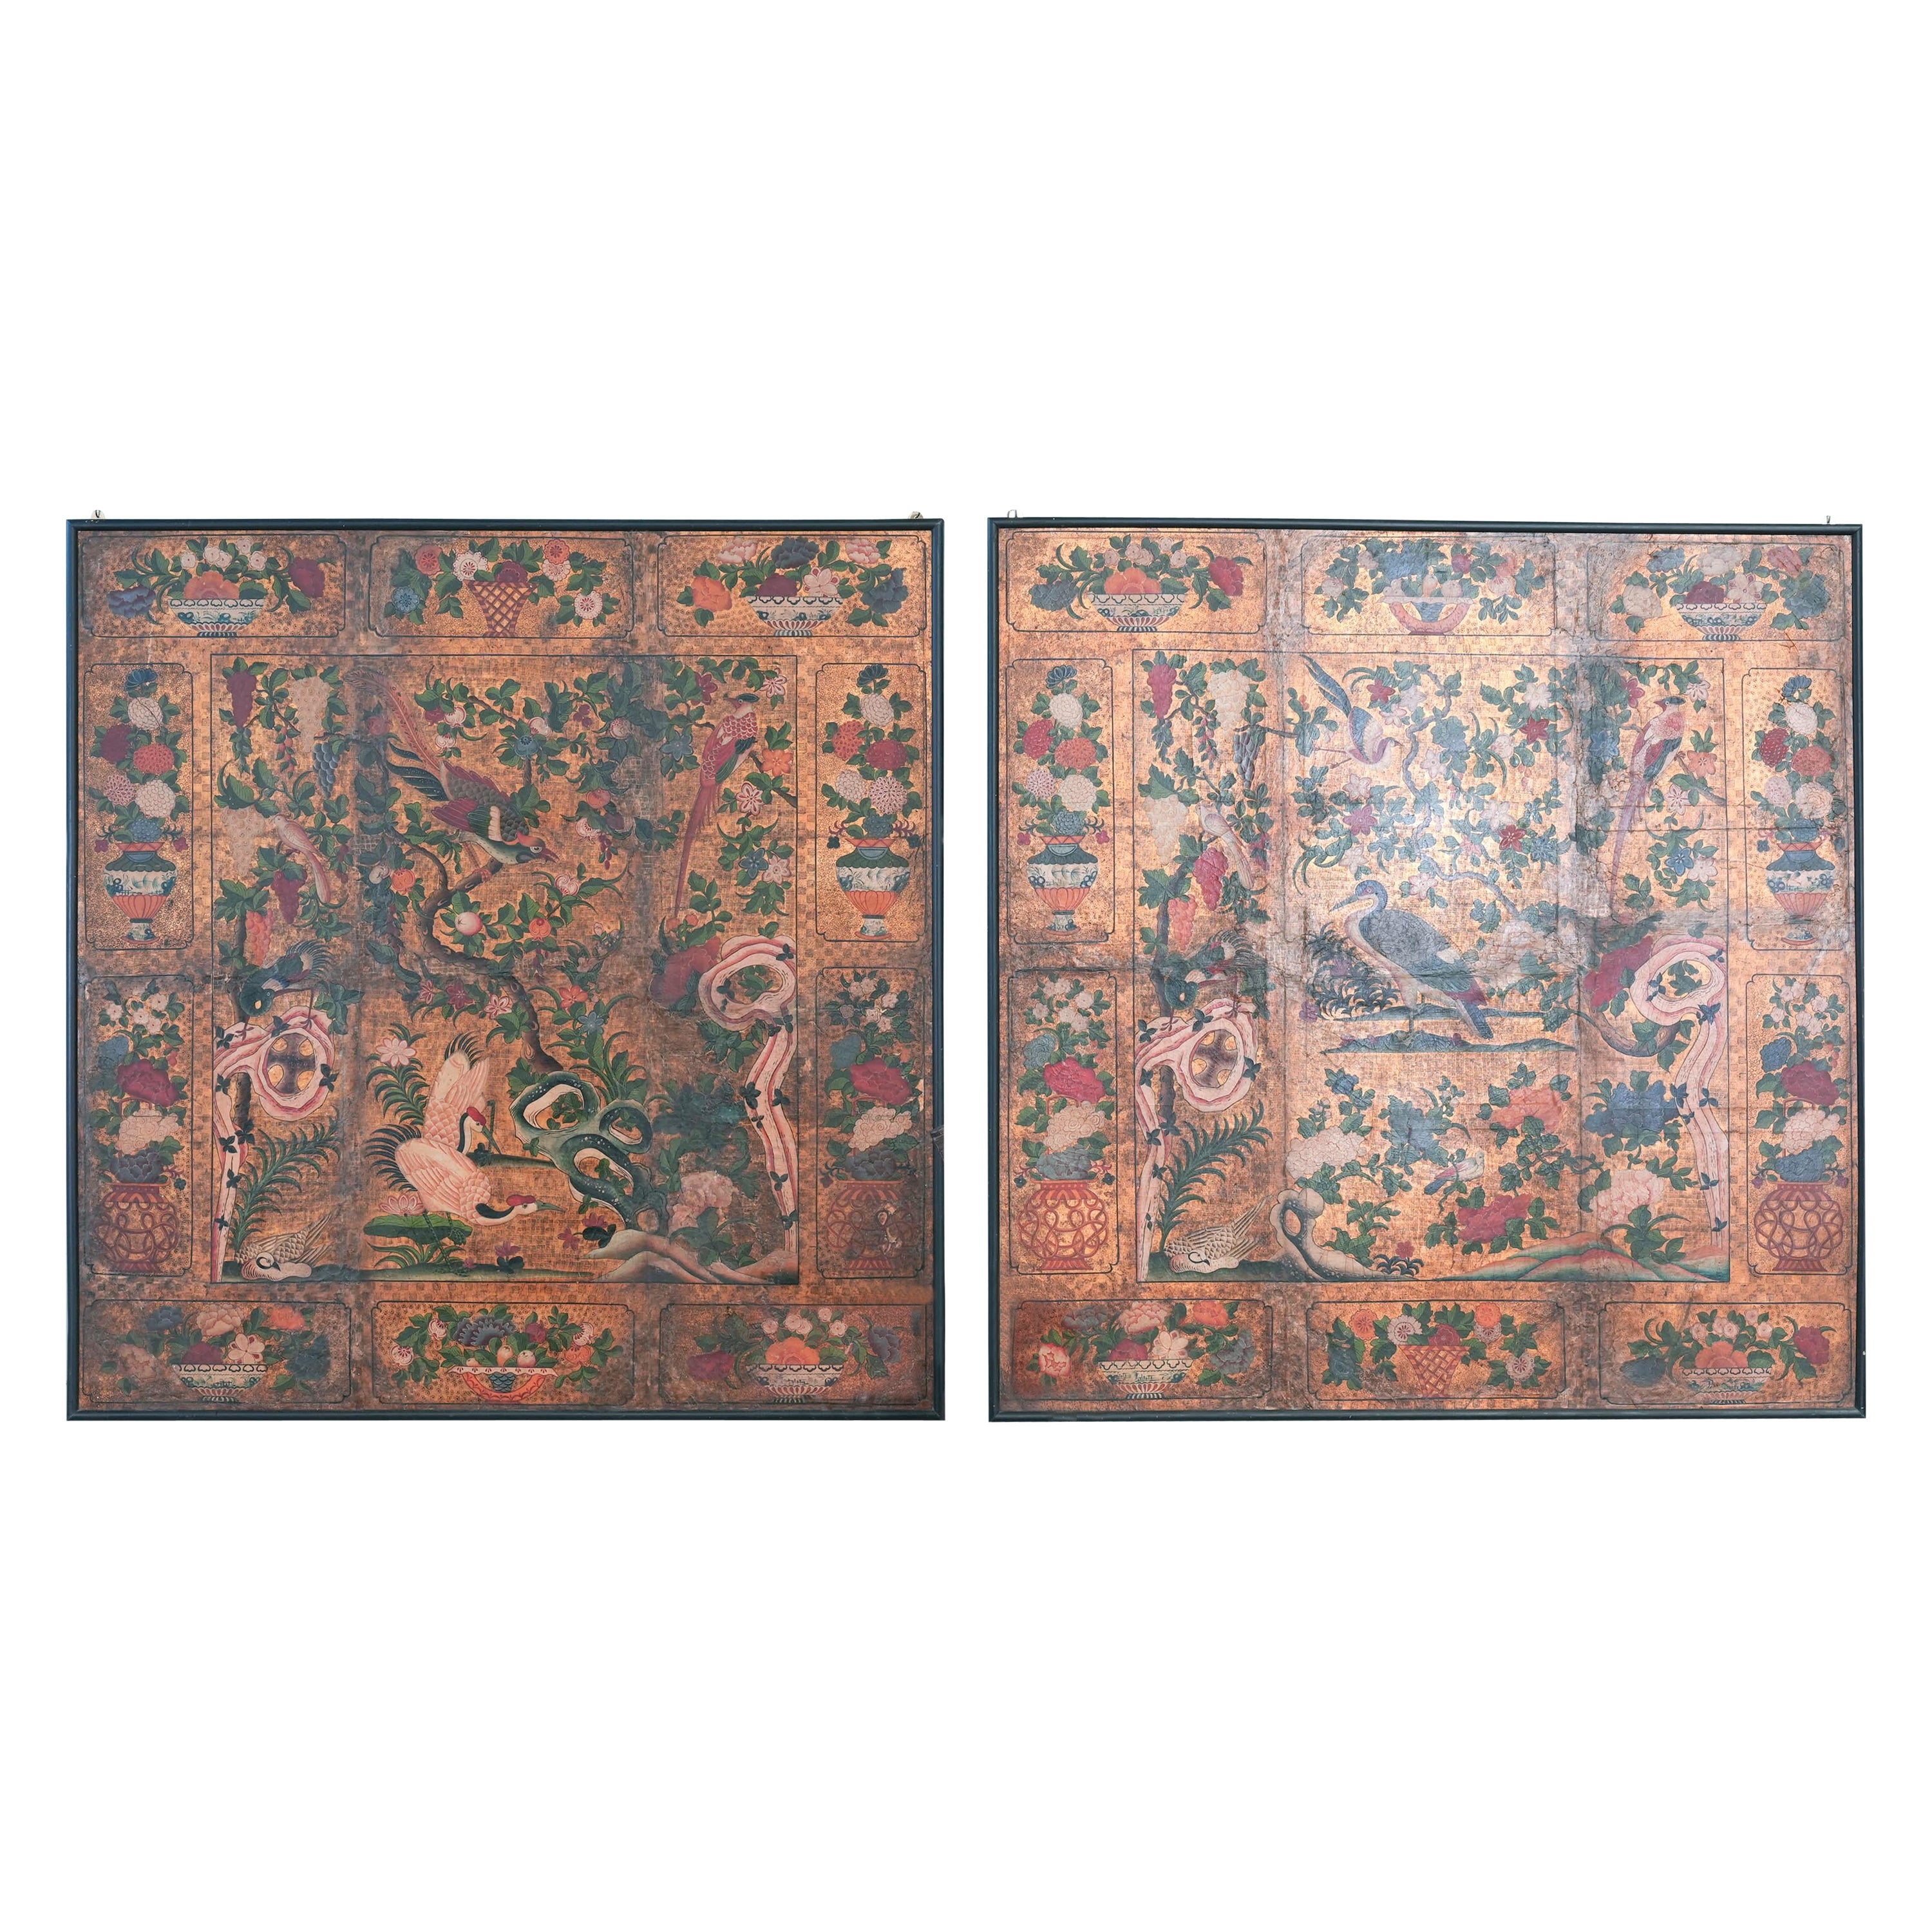 Pair of Early 18th Century “Japanese” Leather Panels